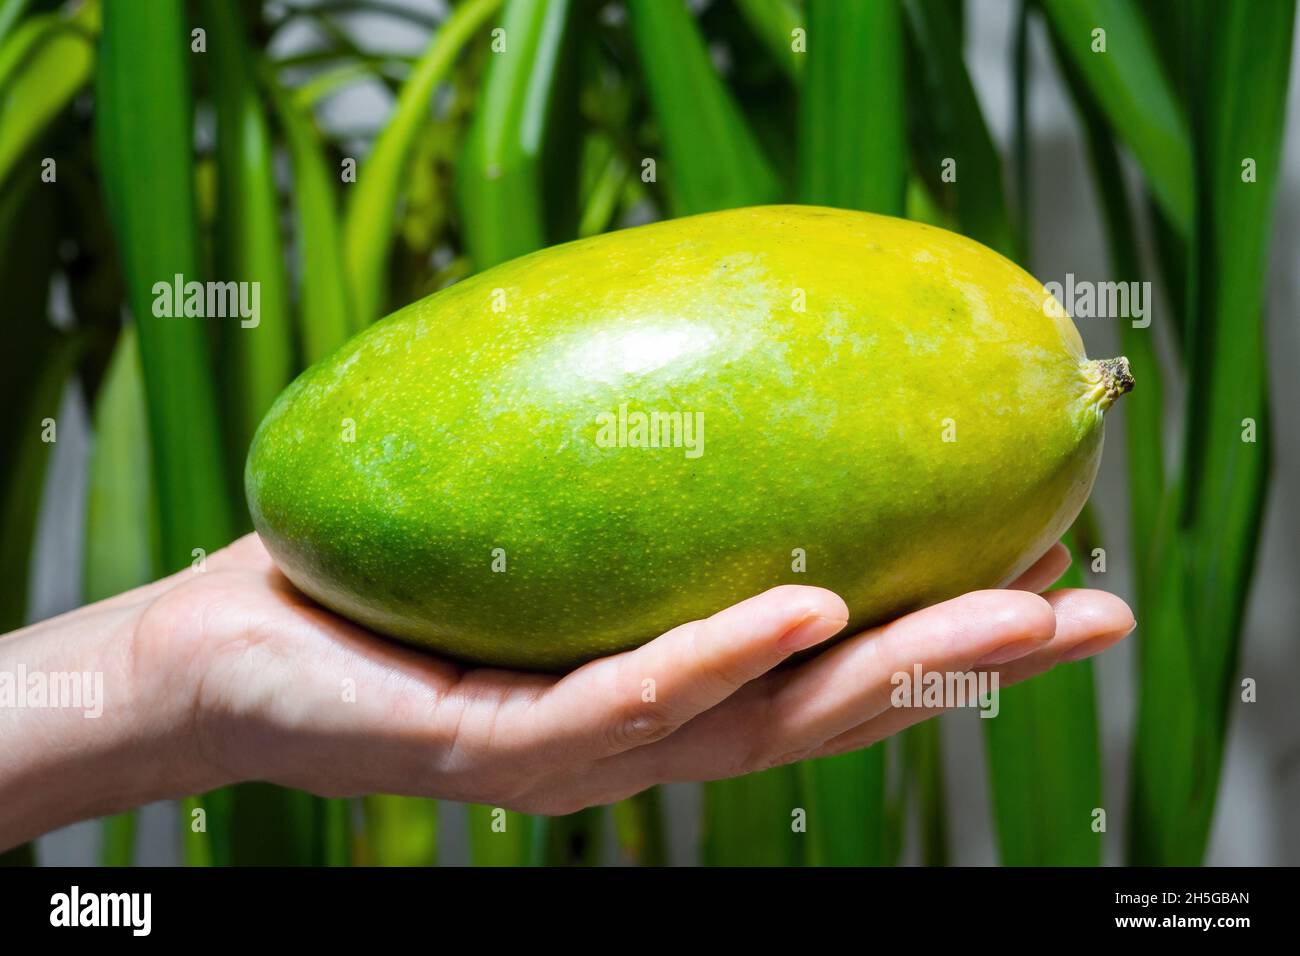 Ripe fresh mango in human hand, woman arm hold yellowish-green fruit on green leaves background. Focus foreground Stock Photo